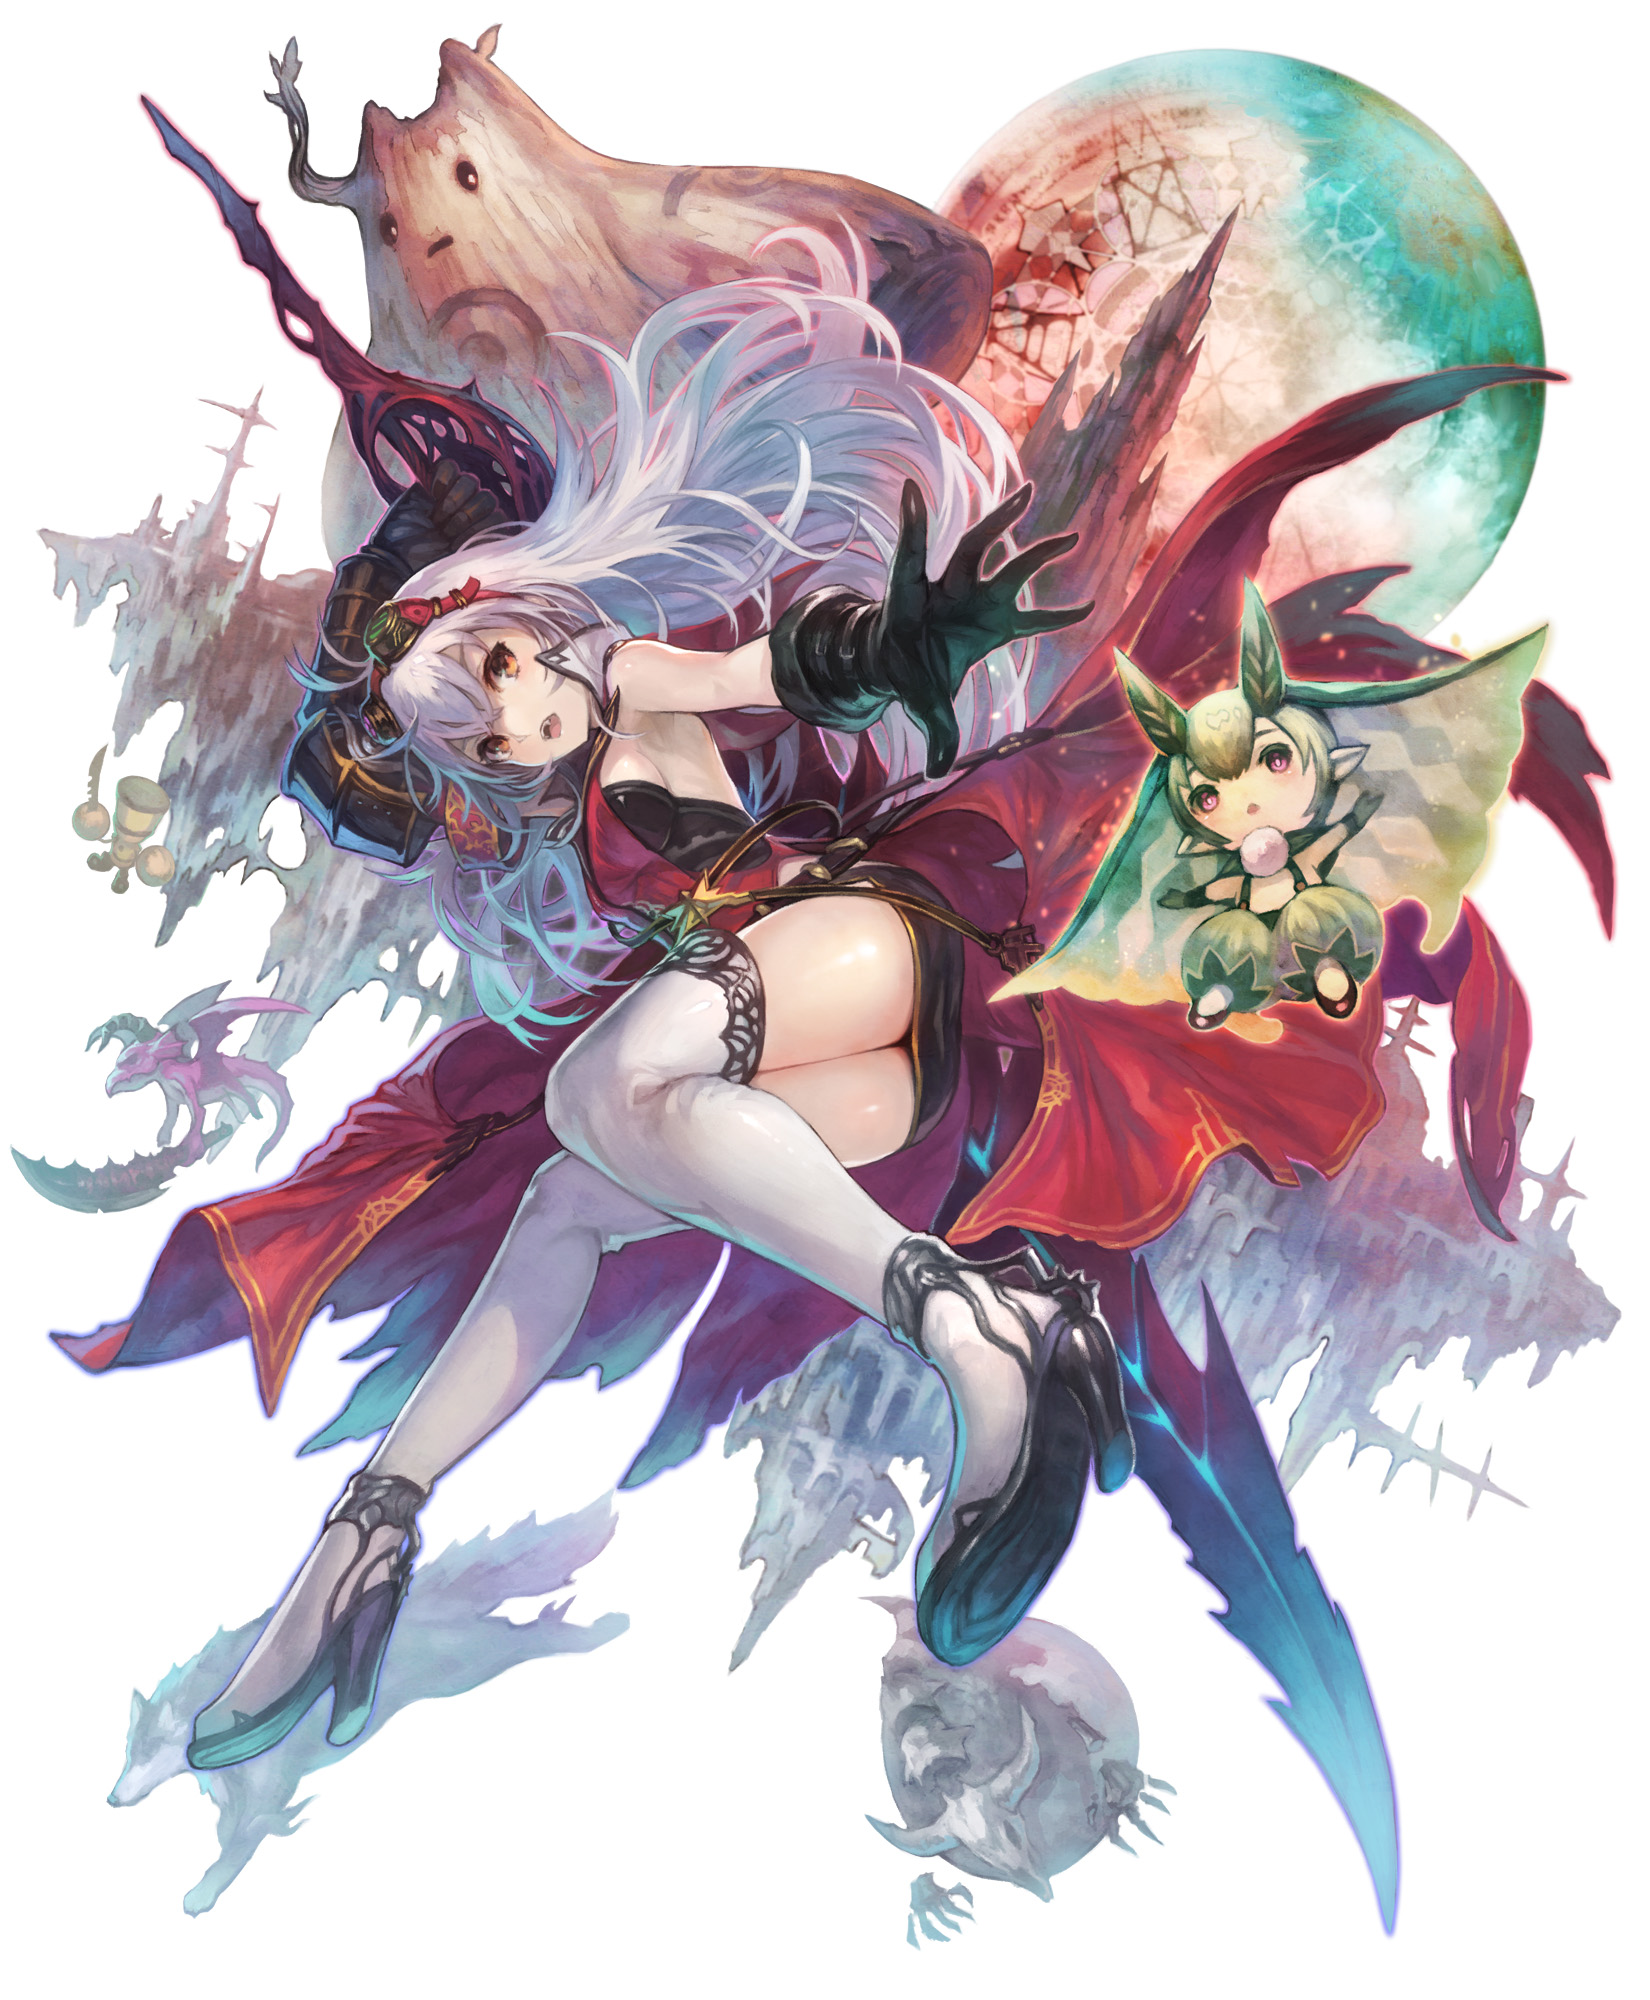 Gust Action JRPG Series ‘Nights of Azure’ Massively Discounted on PSN, Switch & PC